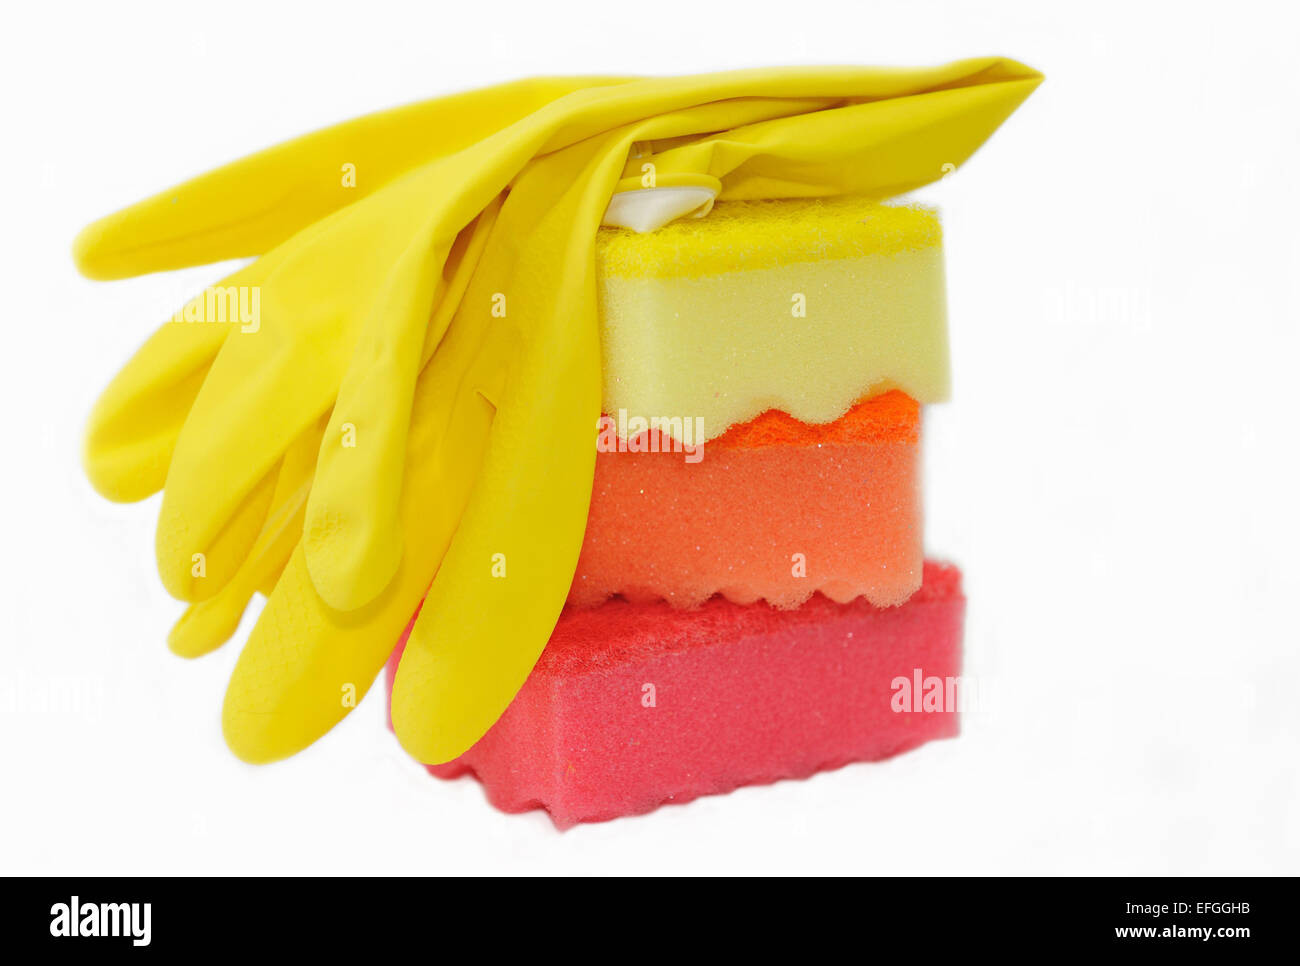 Rubber gloves and sponges for washing dishes isolated on white. Stock Photo